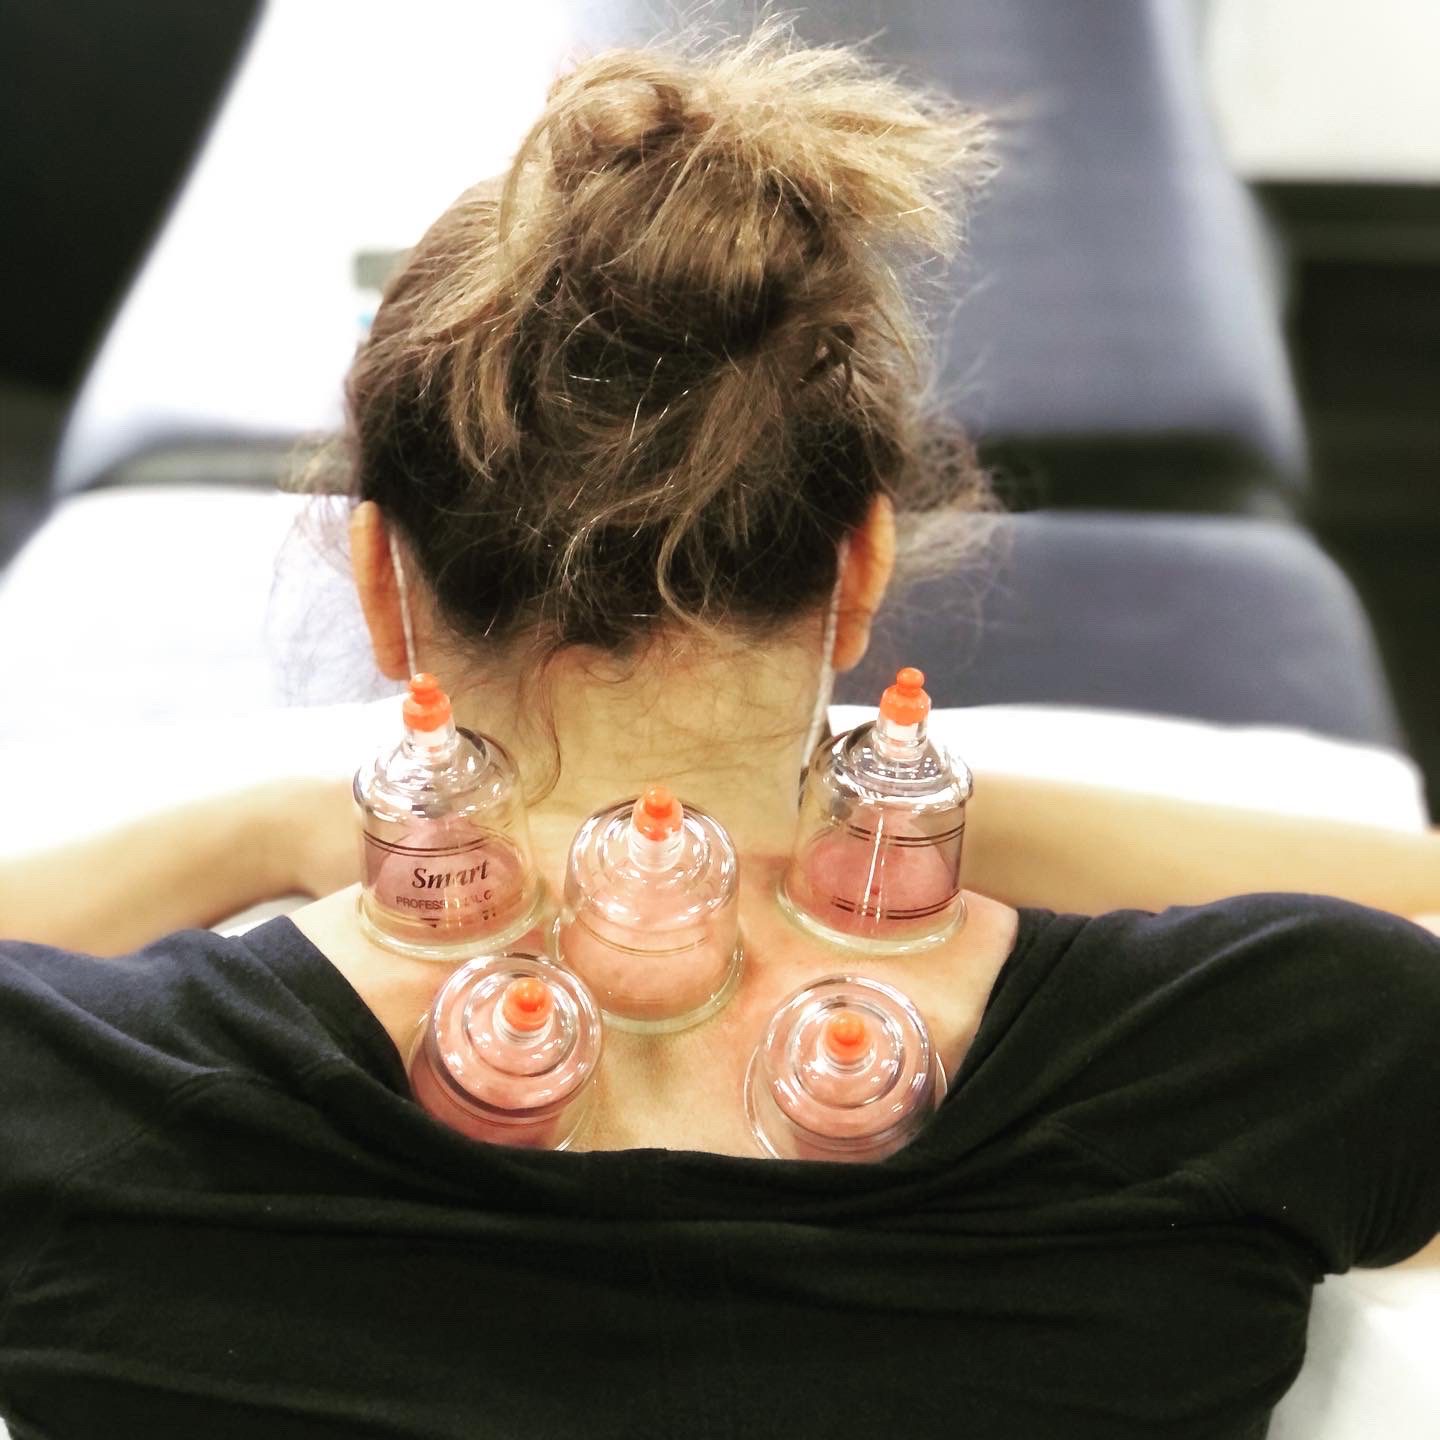 Neckpain-cupping